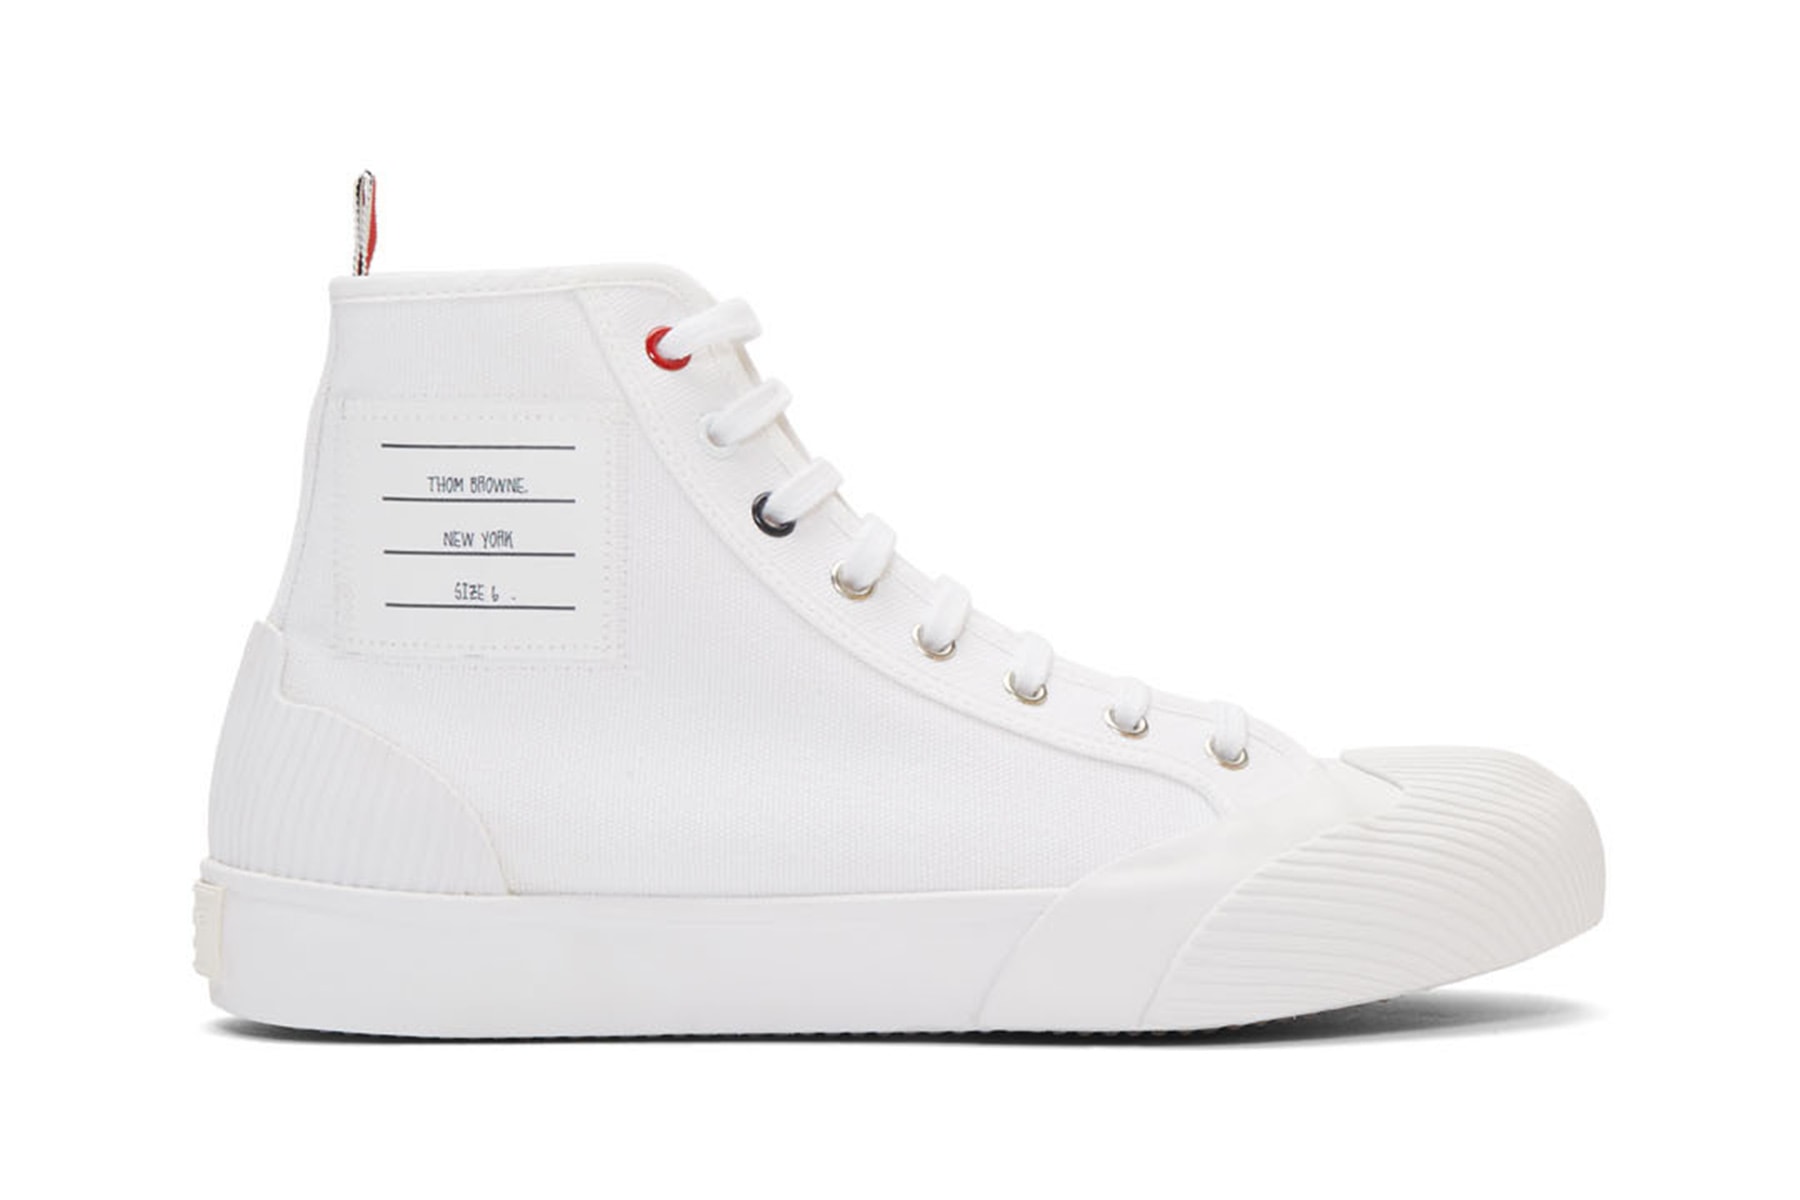 Thom Brown 4 bar  tri-colour grosgrain tab high top sneakers ssense エッセンス ハイトップ カット スニーカー ホワイト ブラック trainers release black white color ways 2019 fall winter トムブラウン ニューヨーク